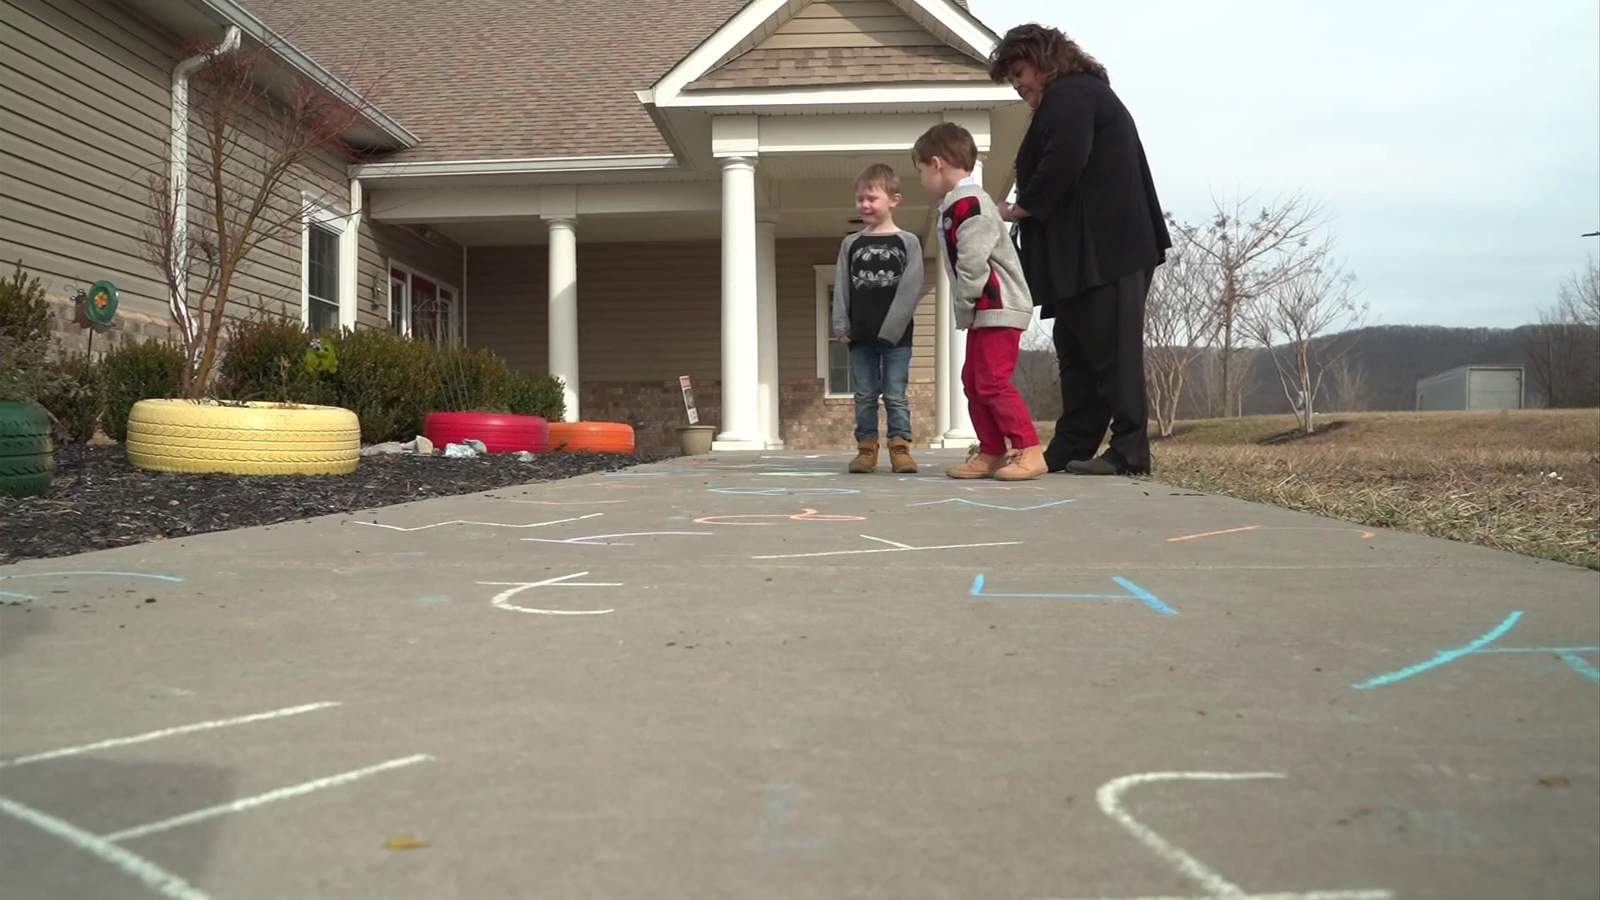 An outdoor activity that makes learning fun